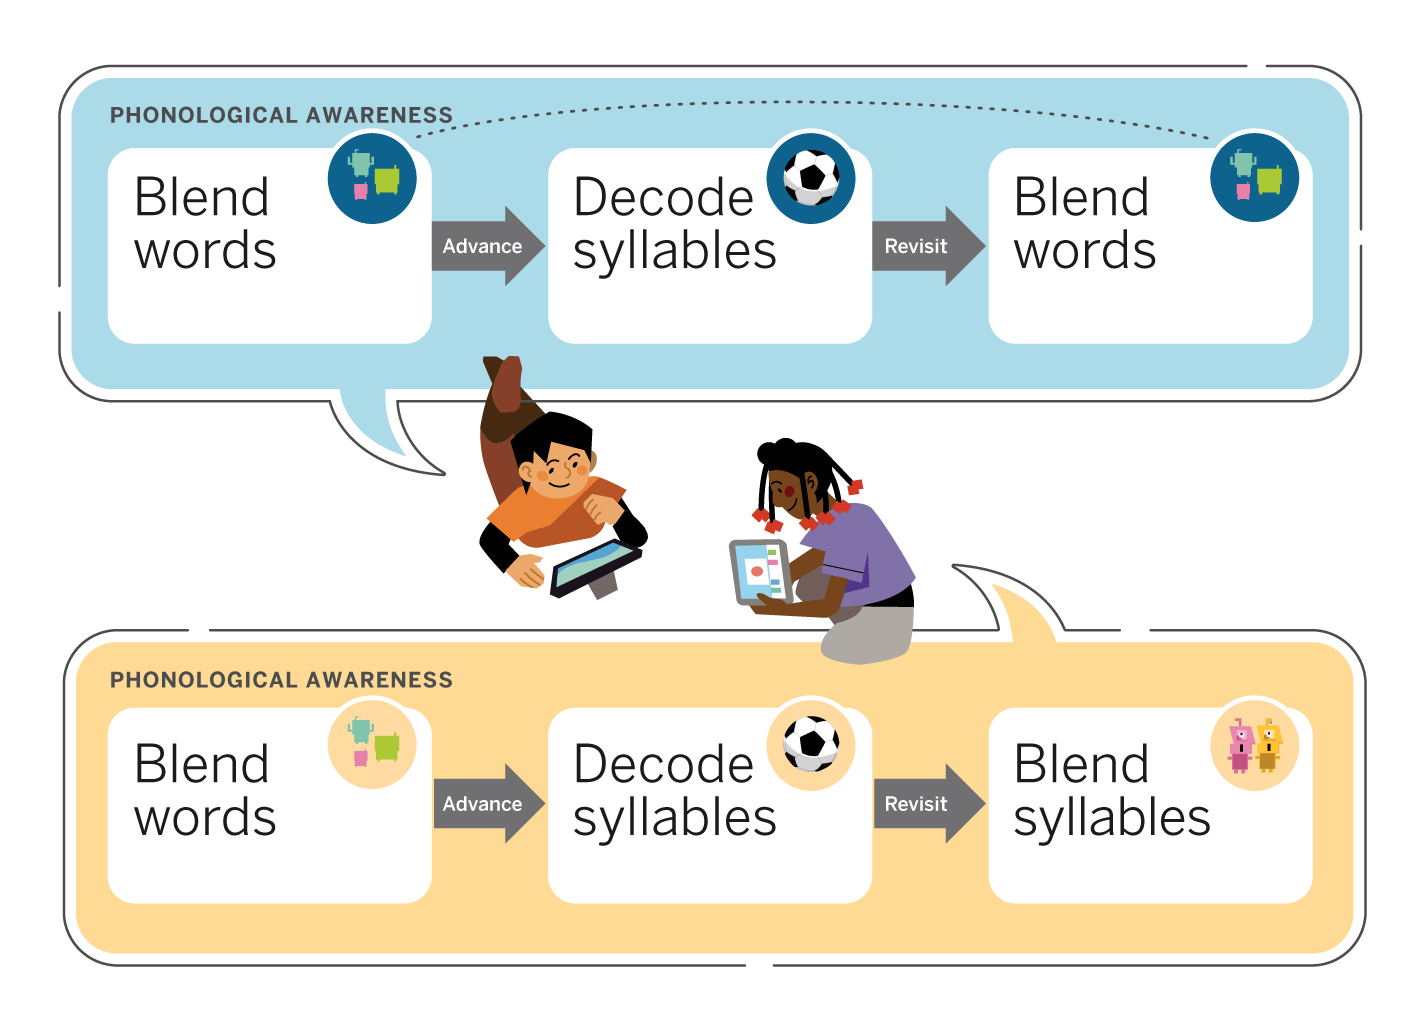 Illustration of two children engaged in personalized Spanish literacy instruction about phonological awareness, emphasizing skills like blending and decoding syllables.